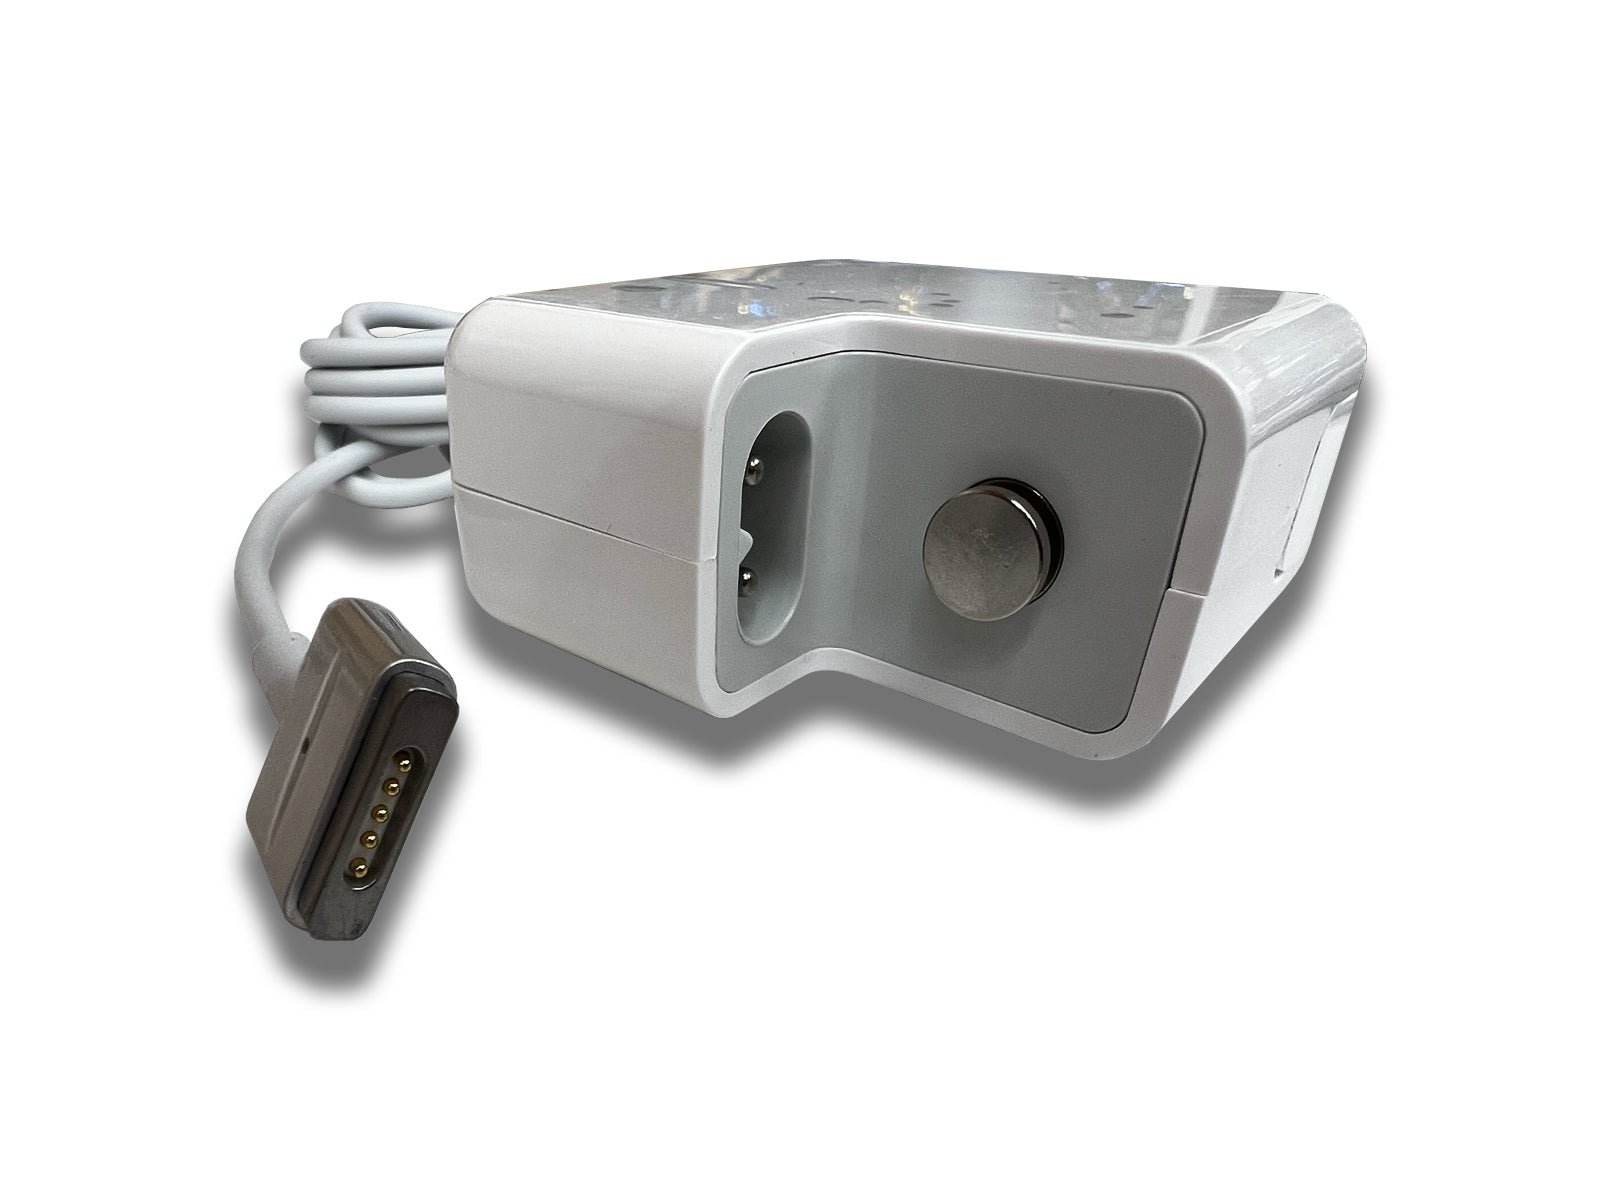 Image-of-the-Magsafe-and-plug-slot-on-the-white-background